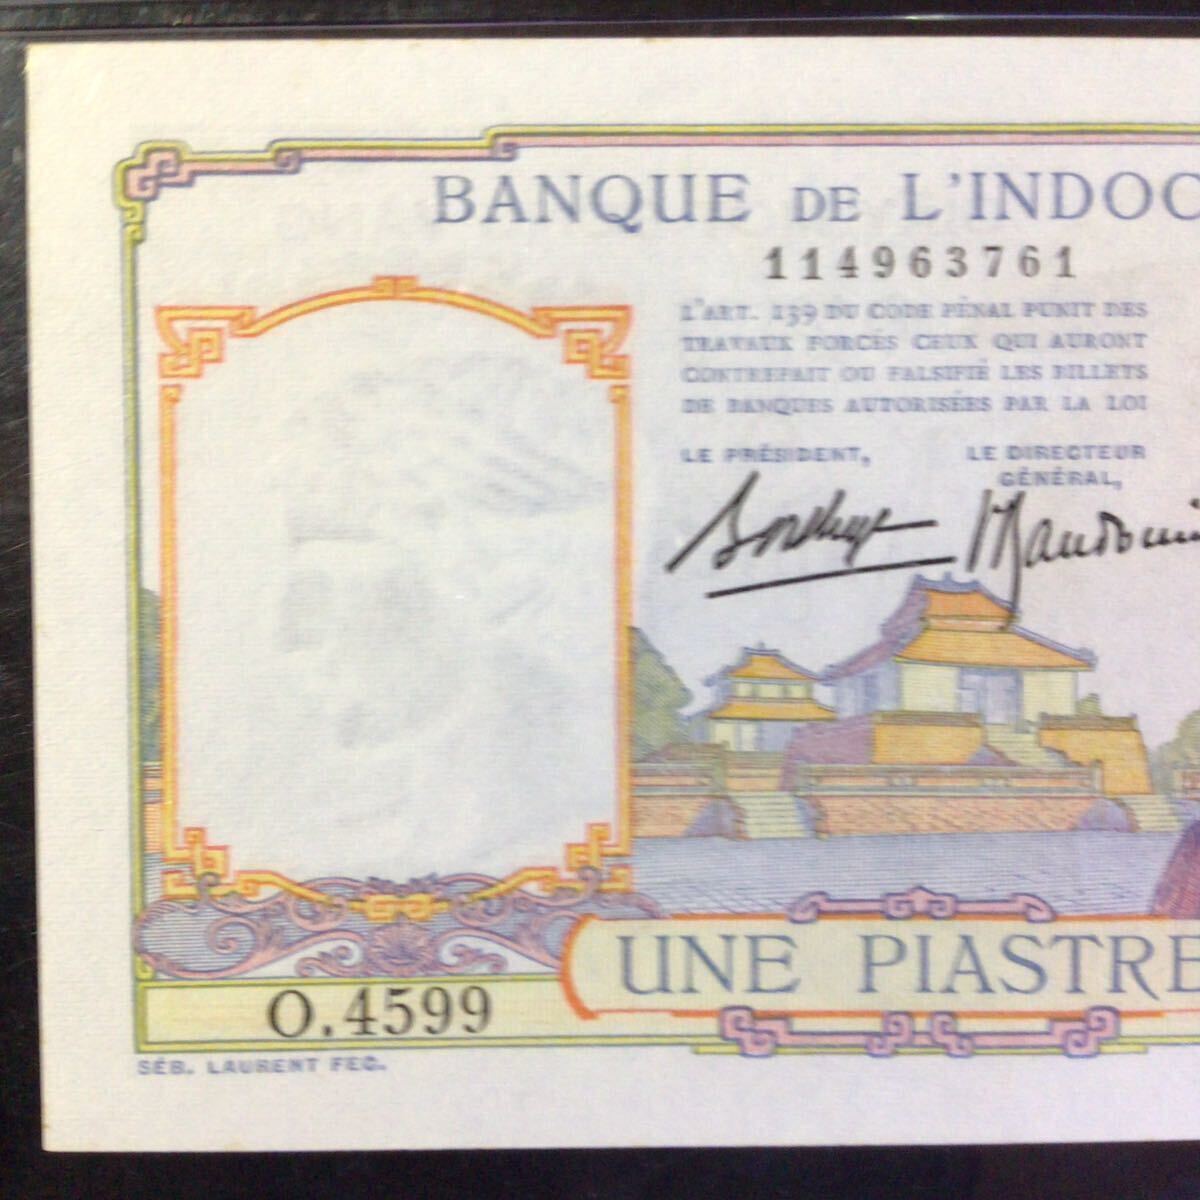 World Banknote Grading FRENCH INDO-CHINA《Banque de l'Indochine》1 Piastre【1936】『PMG Grading Choice Uncirculated 64』_画像4